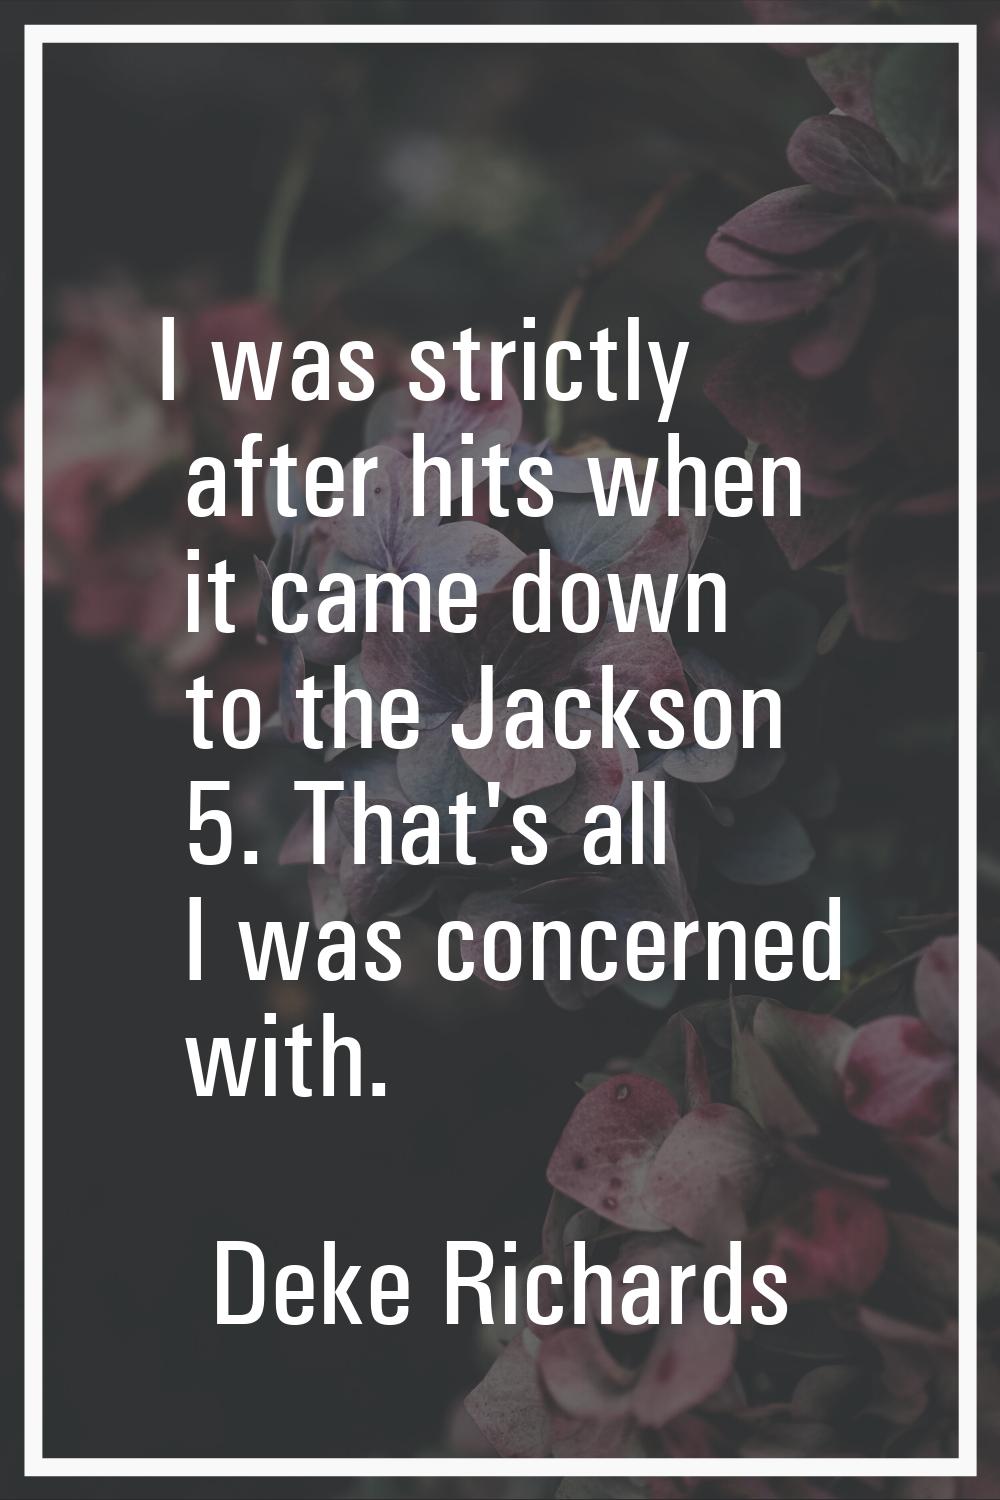 I was strictly after hits when it came down to the Jackson 5. That's all I was concerned with.